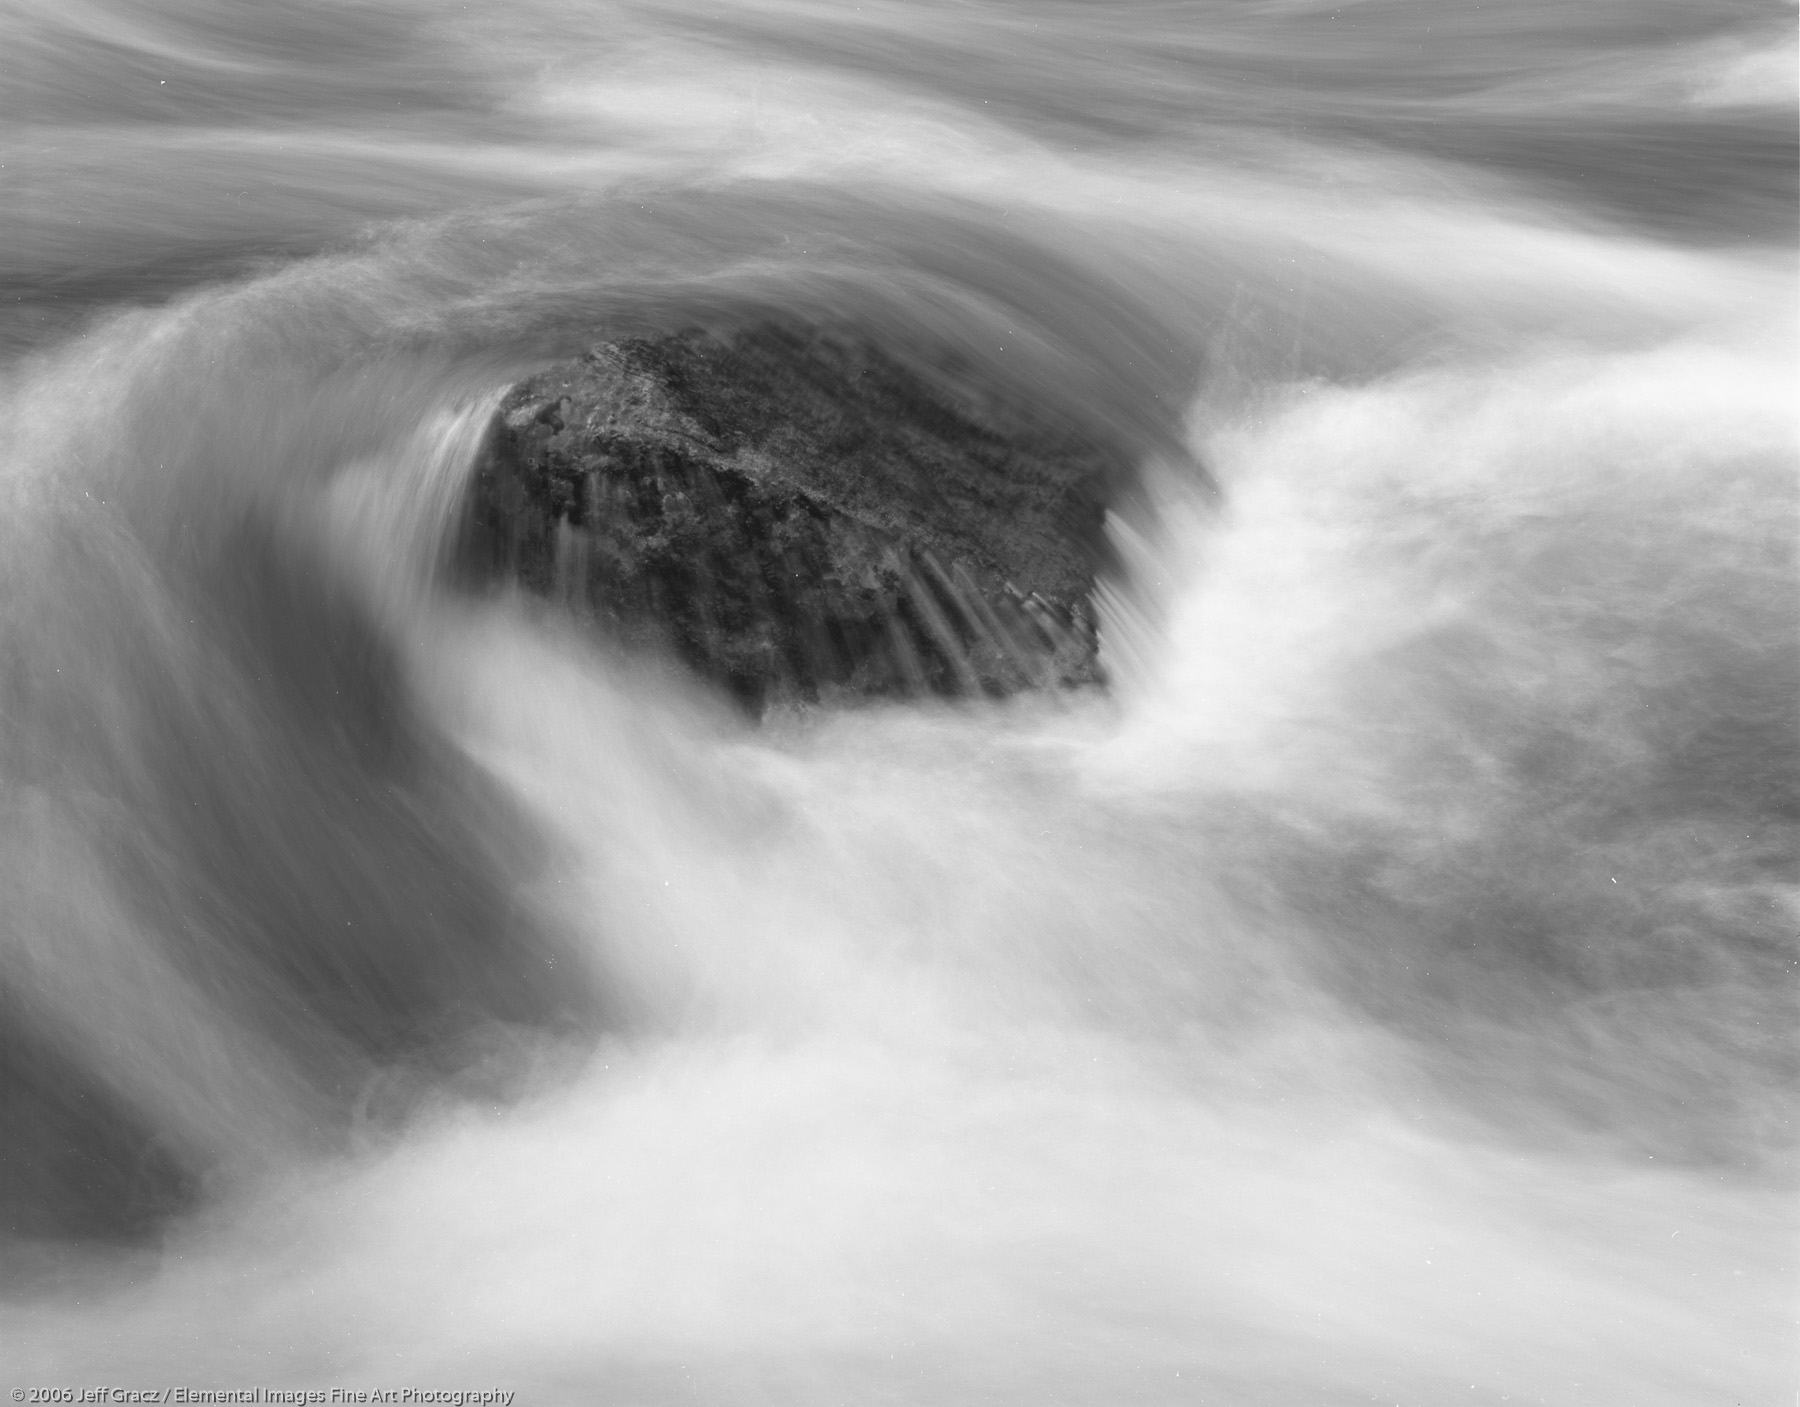 rock and flowing river | umatilla national forest | OR | usa - © © 2006 Jeff Gracz / Elemental Images Fine Art Photography - All Rights Reserved Worldwide